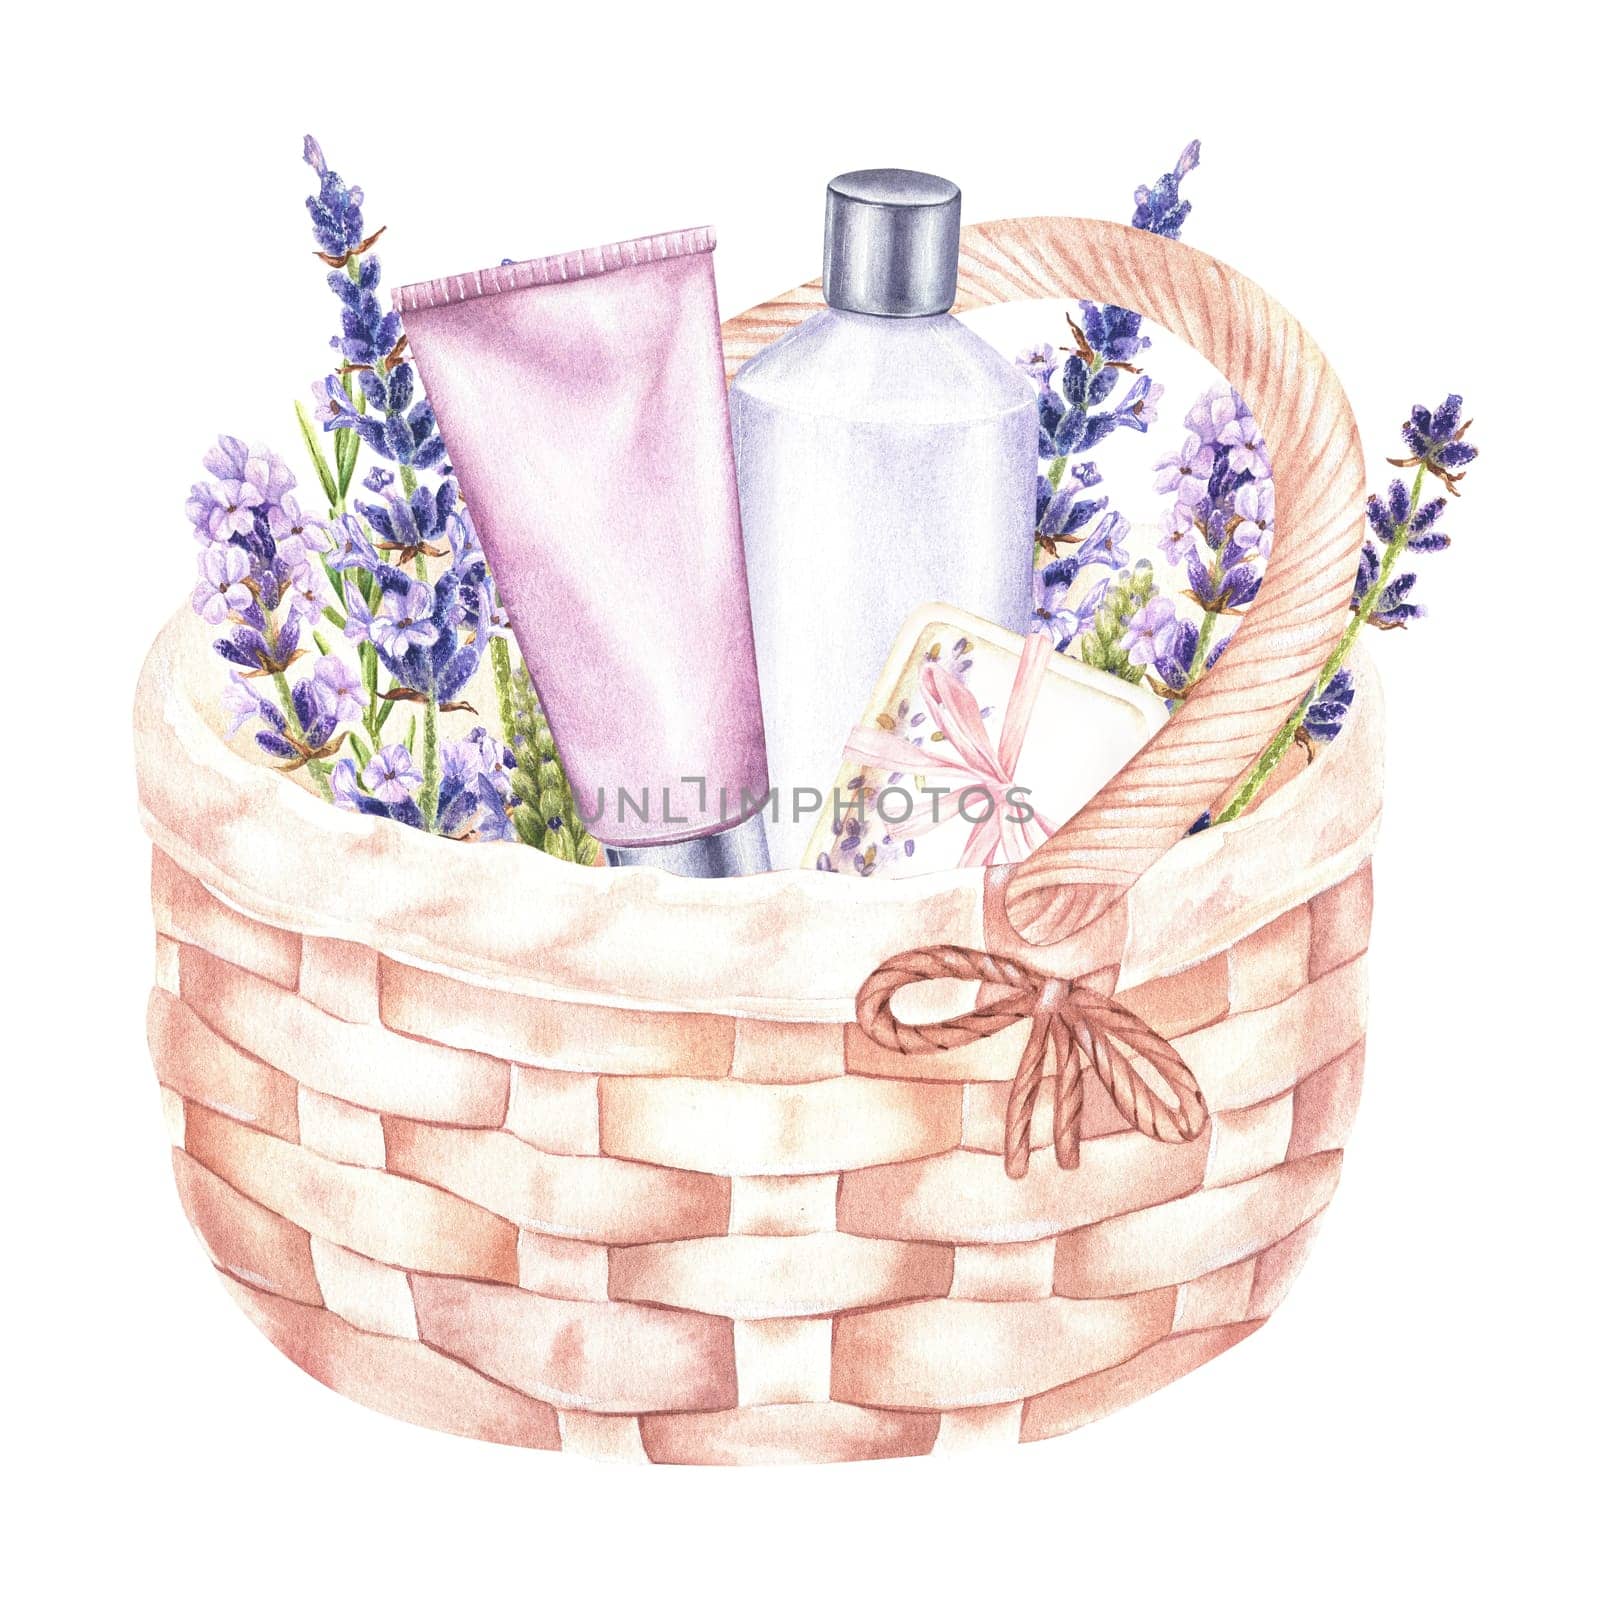 Watercolor illustration. Wicker basket with lavender and a set of cosmetics. Isolated on a white background. Purple shampoo, balm, soap as a gift. For the design of posters for beauty spa salons by Trilisti